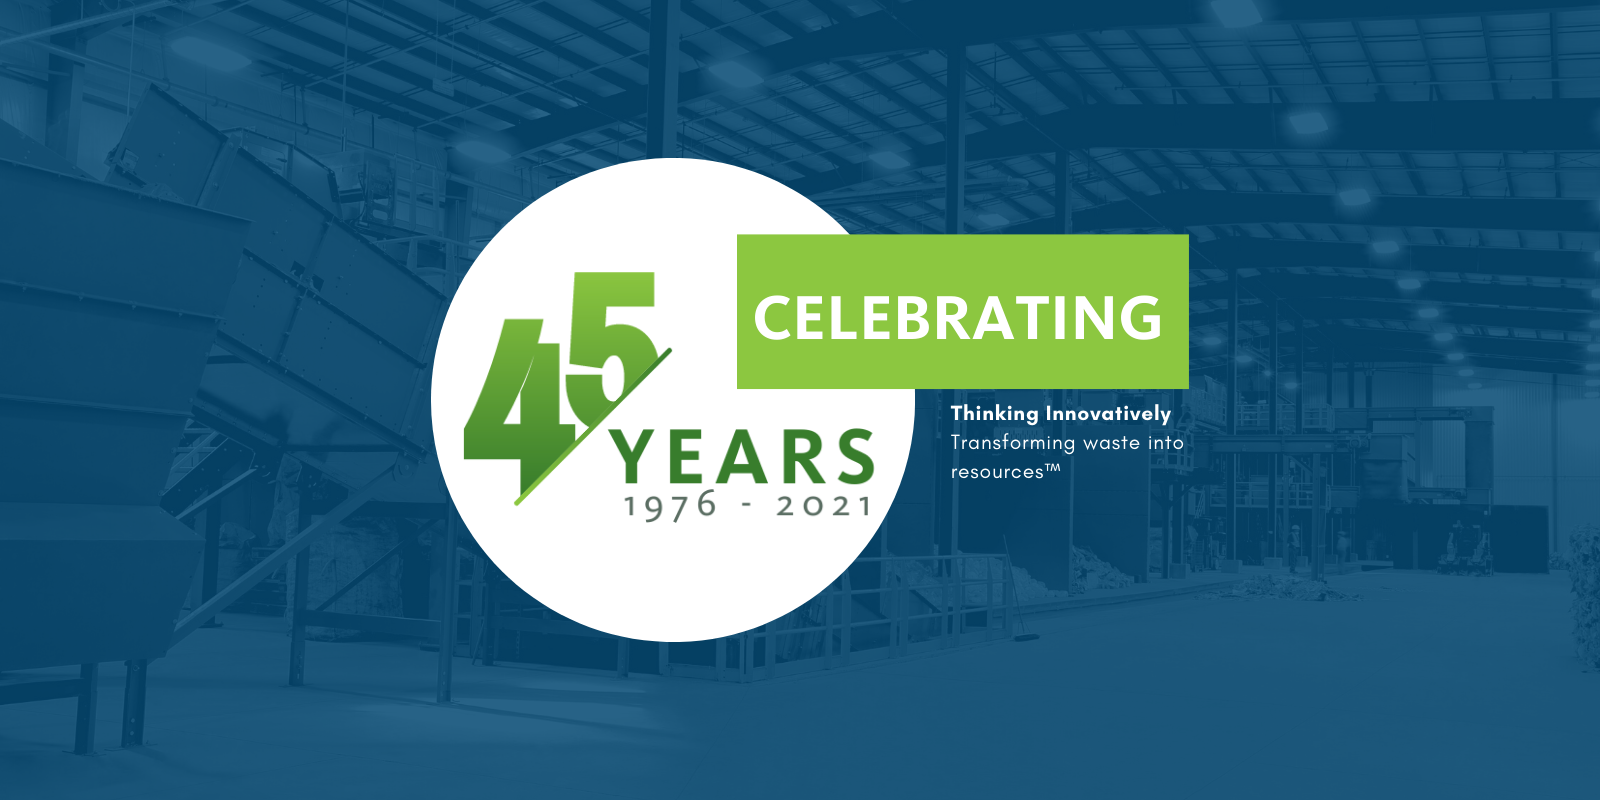 Emterra group is celebrating 45 years. 1976-2021. Thinking innovatively. Transforming waste into resources. 